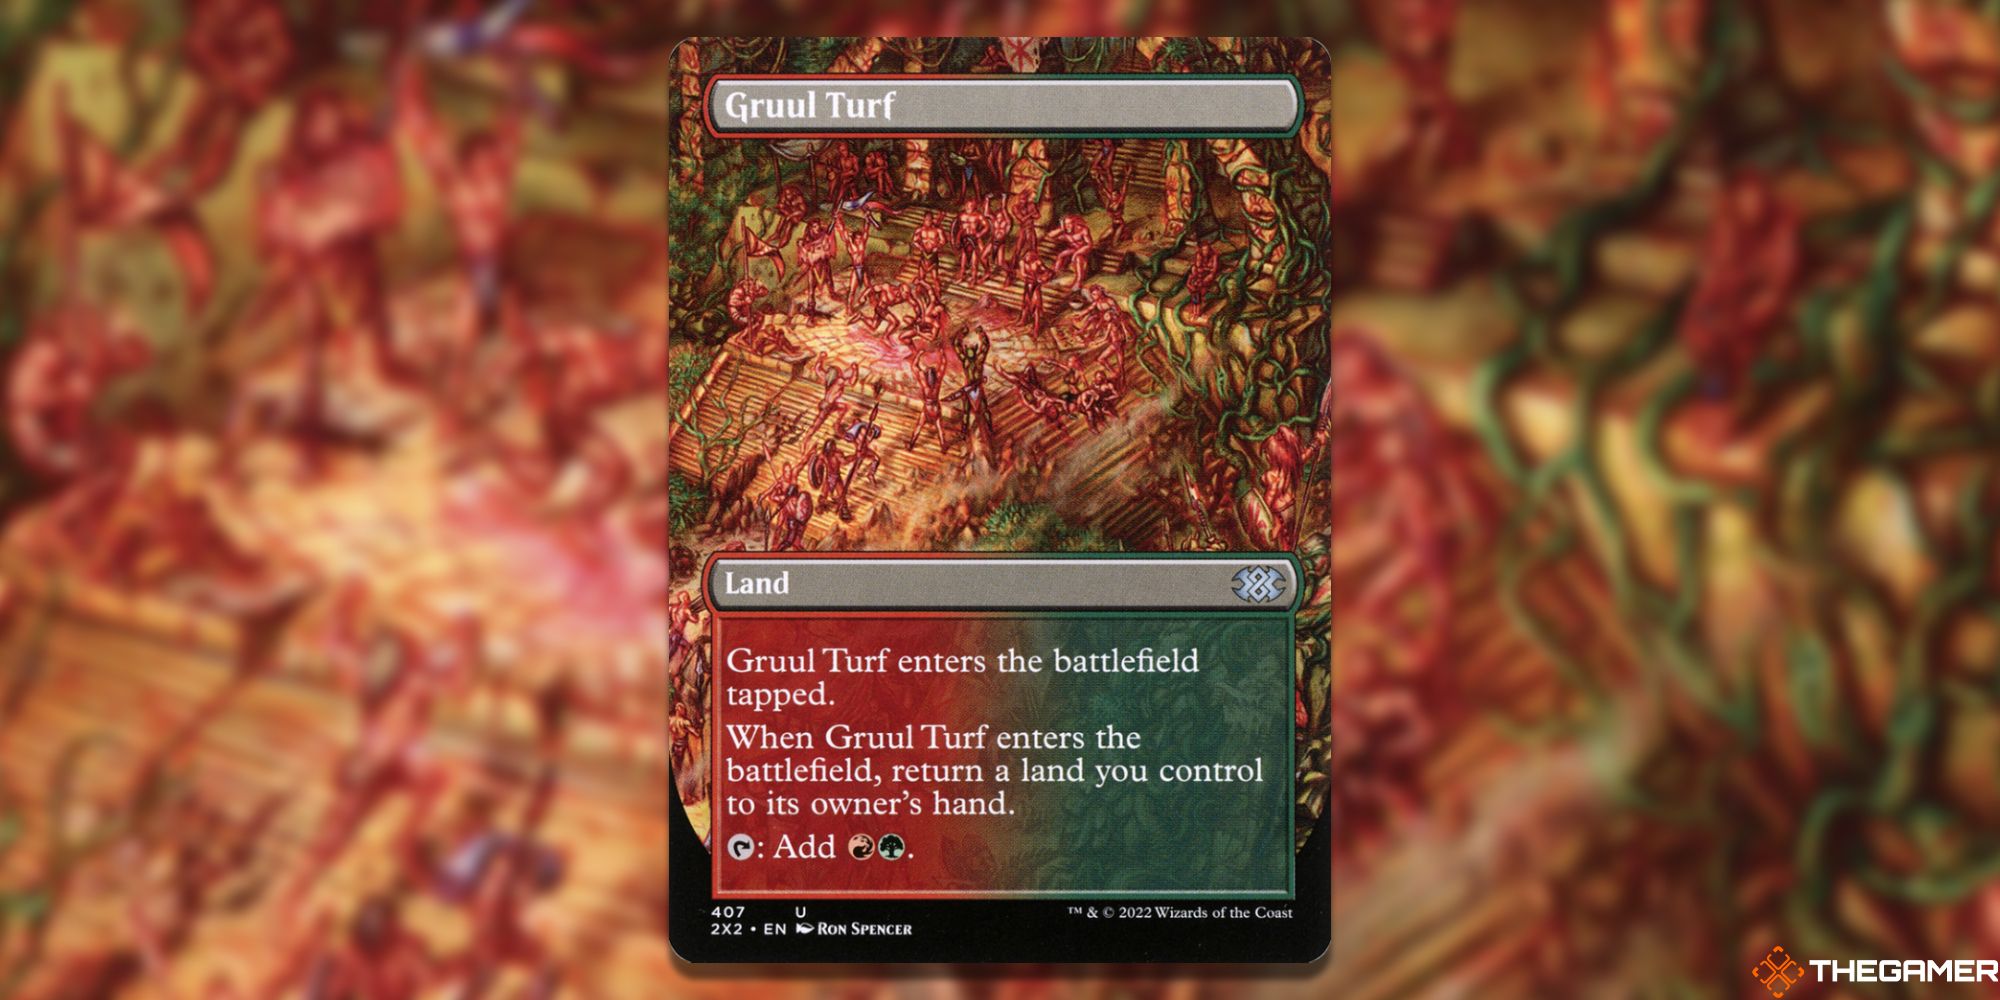 The card Gruul Turf from Magic: The Gathering.